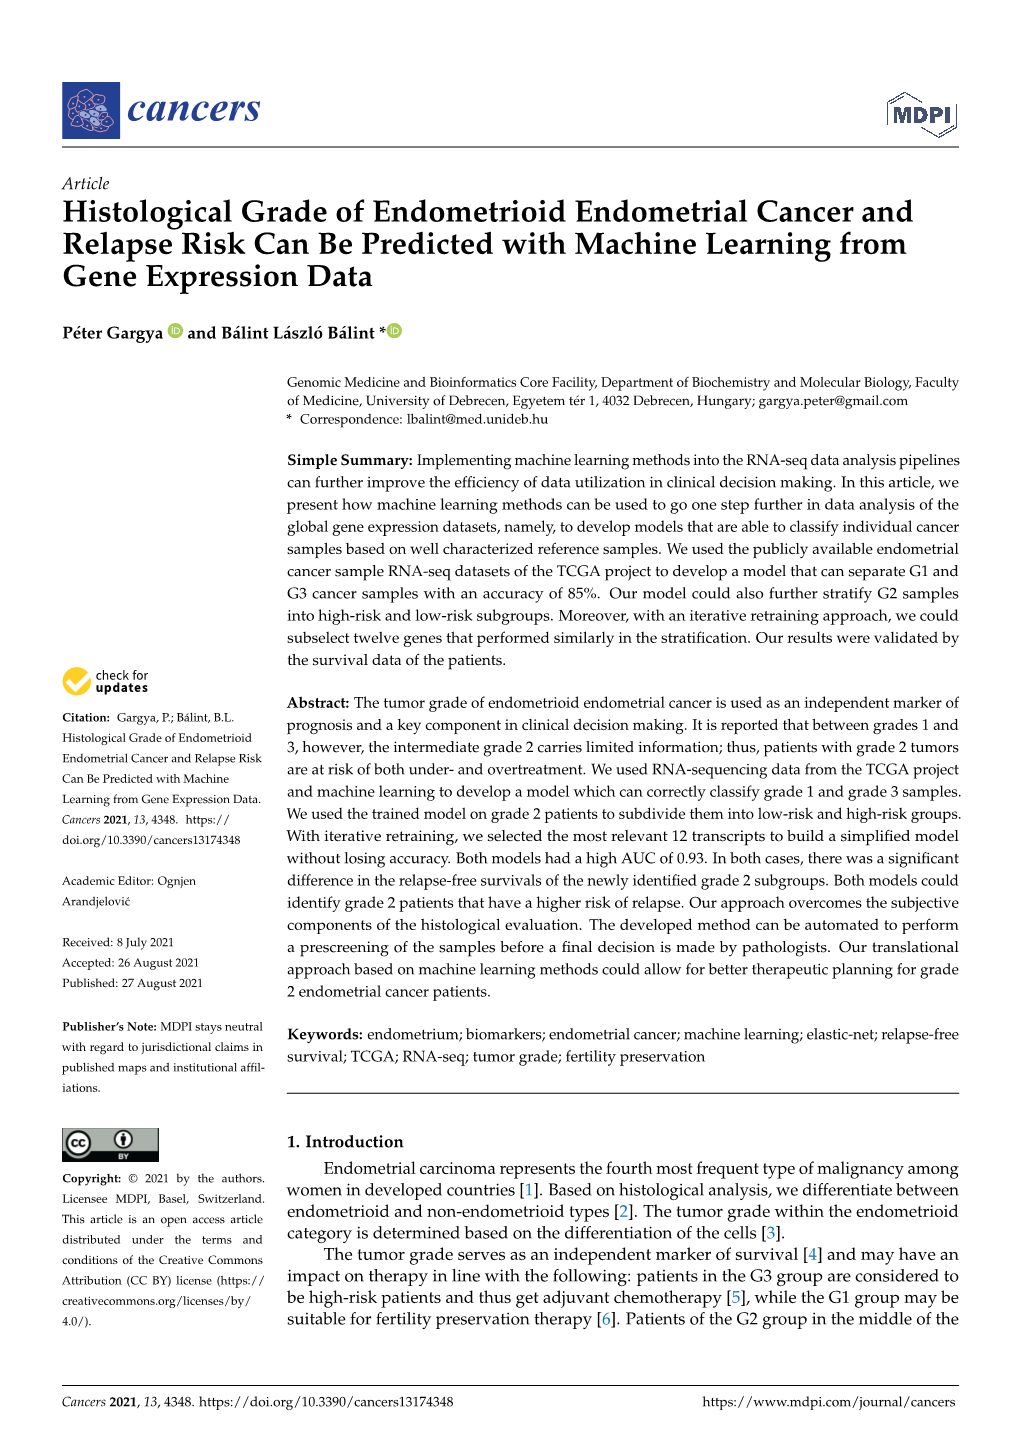 Histological Grade of Endometrioid Endometrial Cancer and Relapse Risk Can Be Predicted with Machine Learning from Gene Expression Data